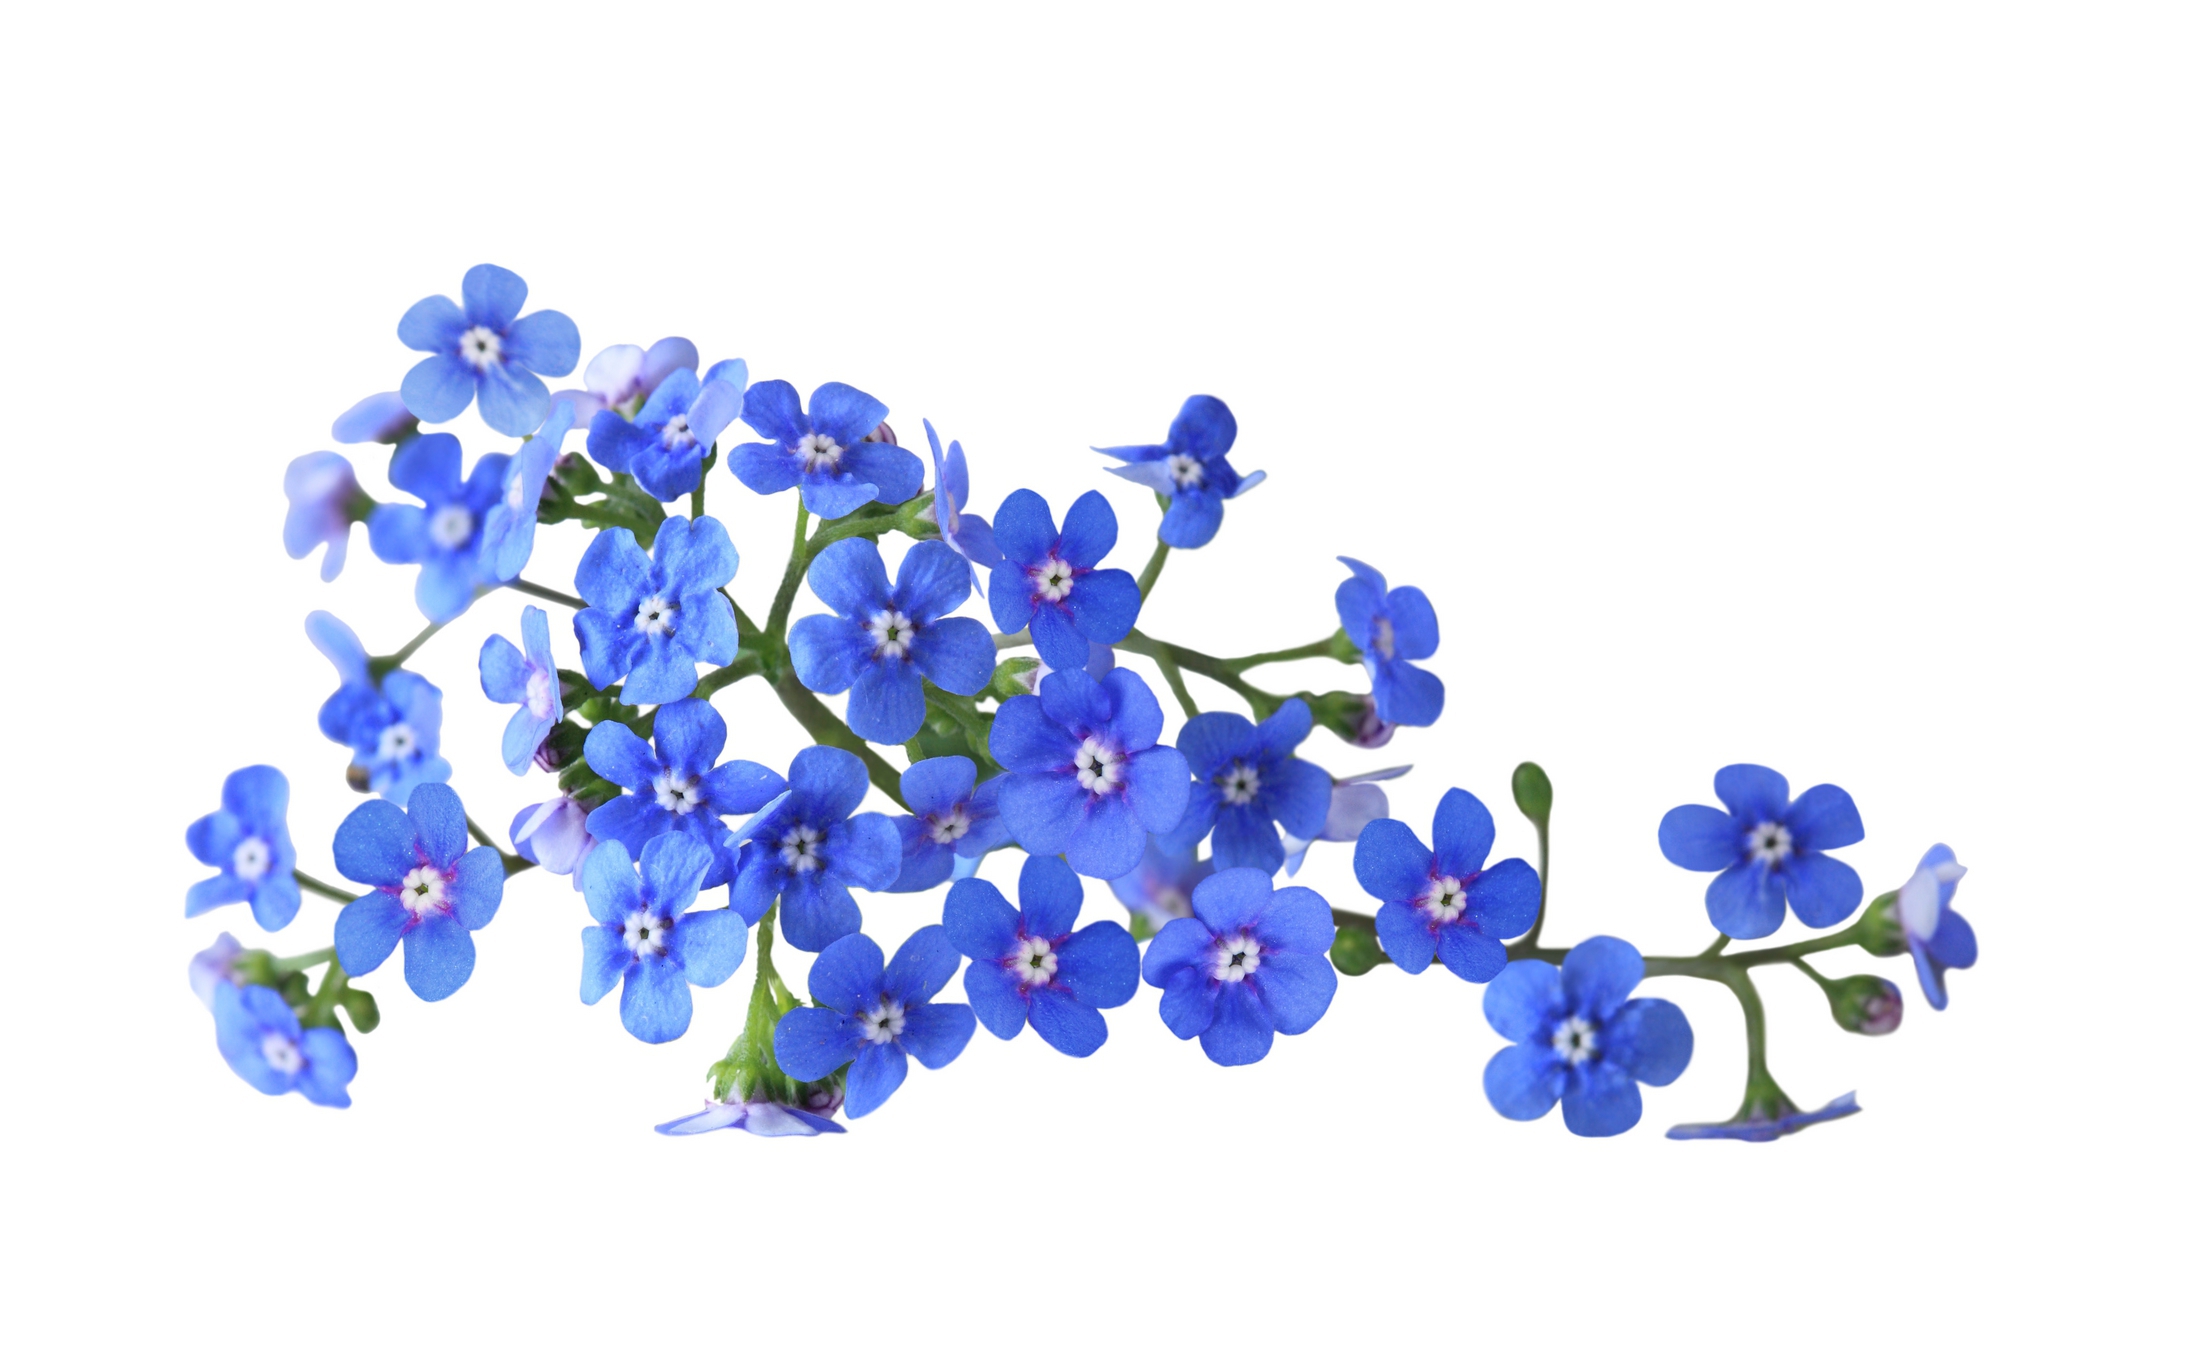 Forget Me Not Flower Wallpapers Images Photos Pictures Backgrounds